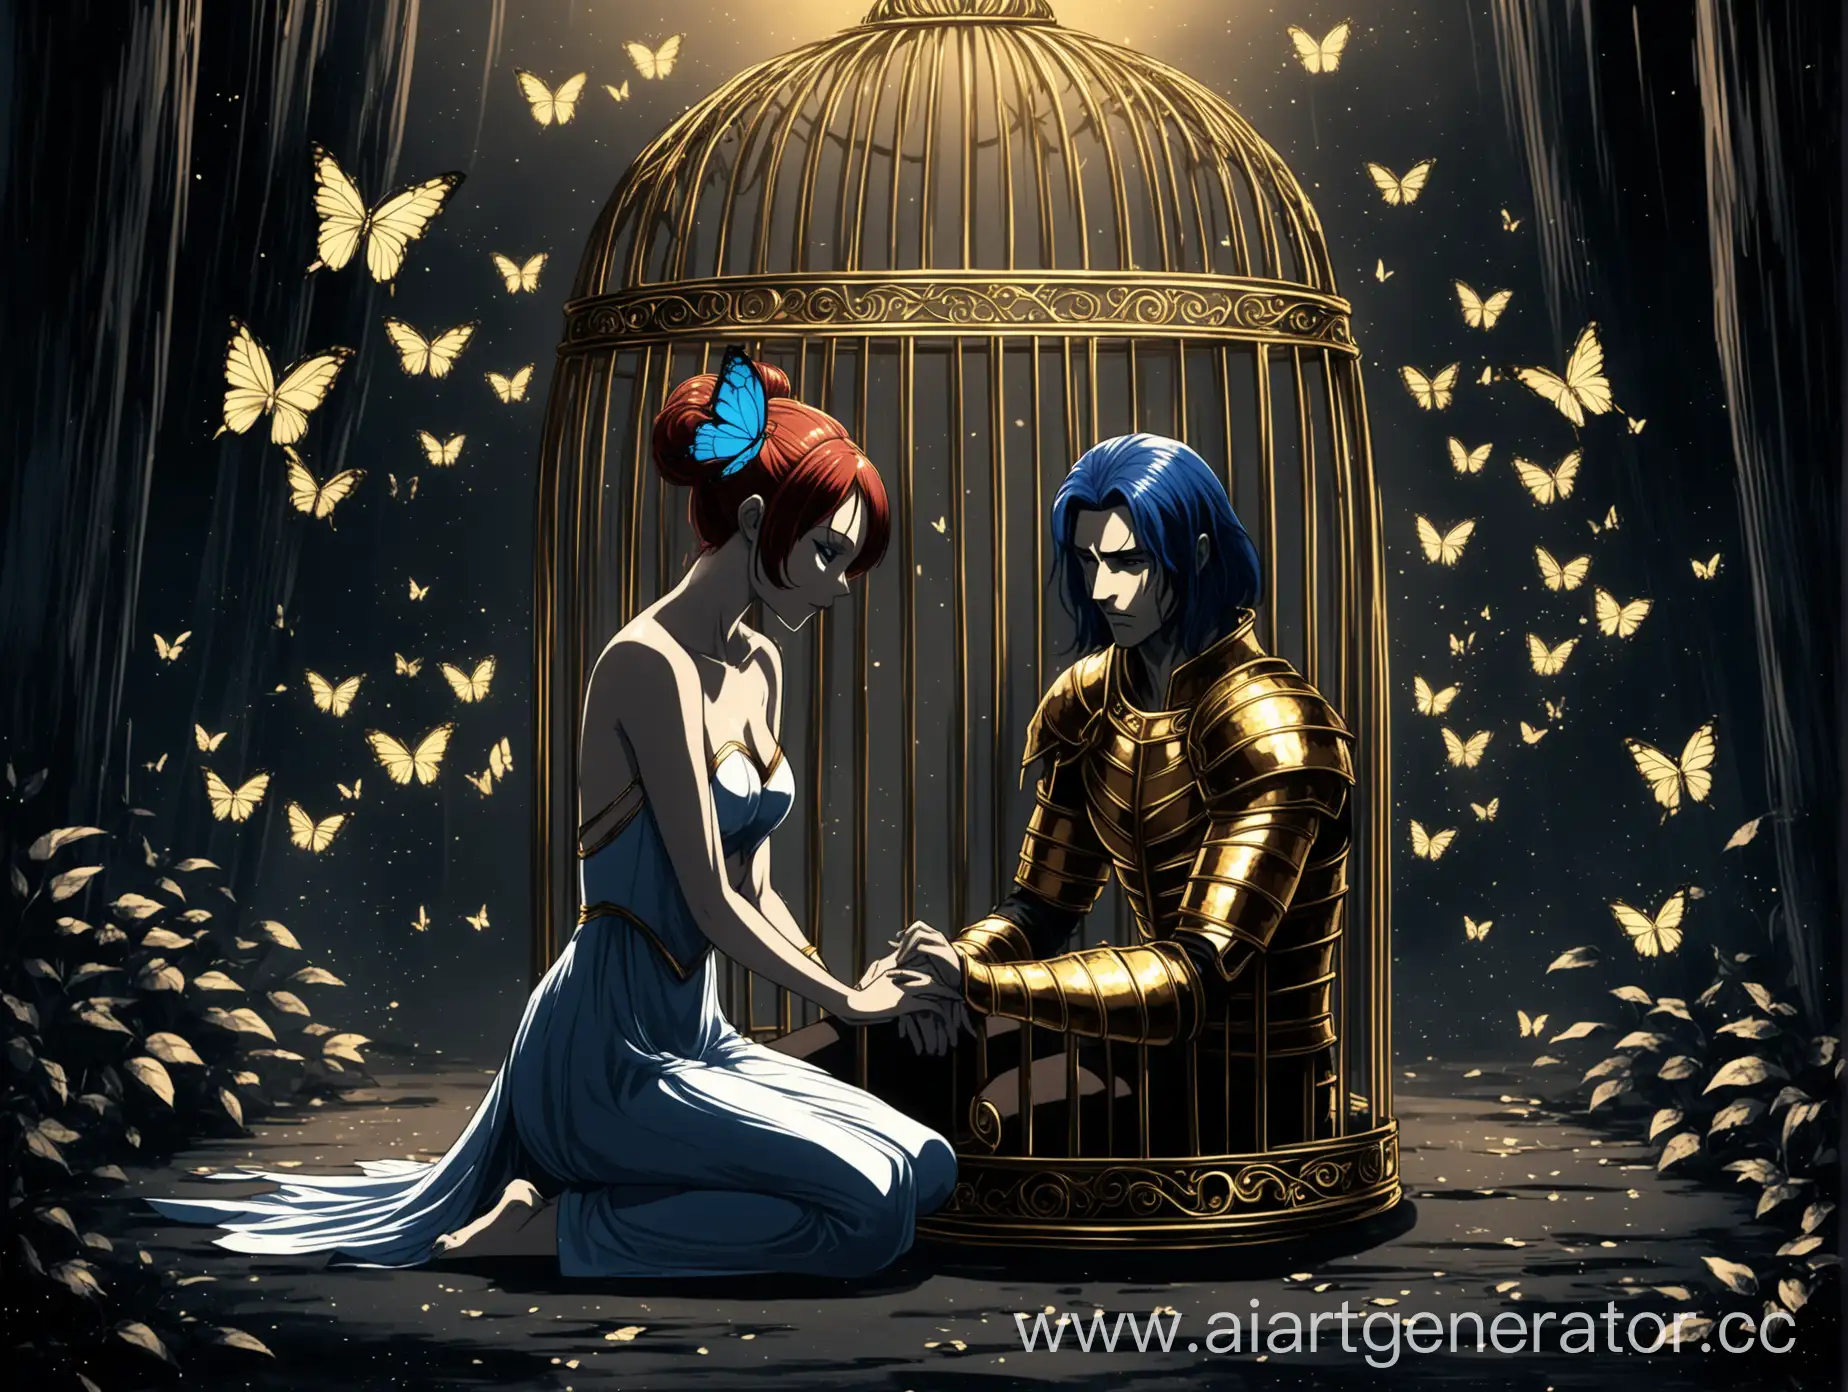 Mystical-Anime-Scene-Captive-Fairy-and-Devoted-Warrior-in-Golden-Cage